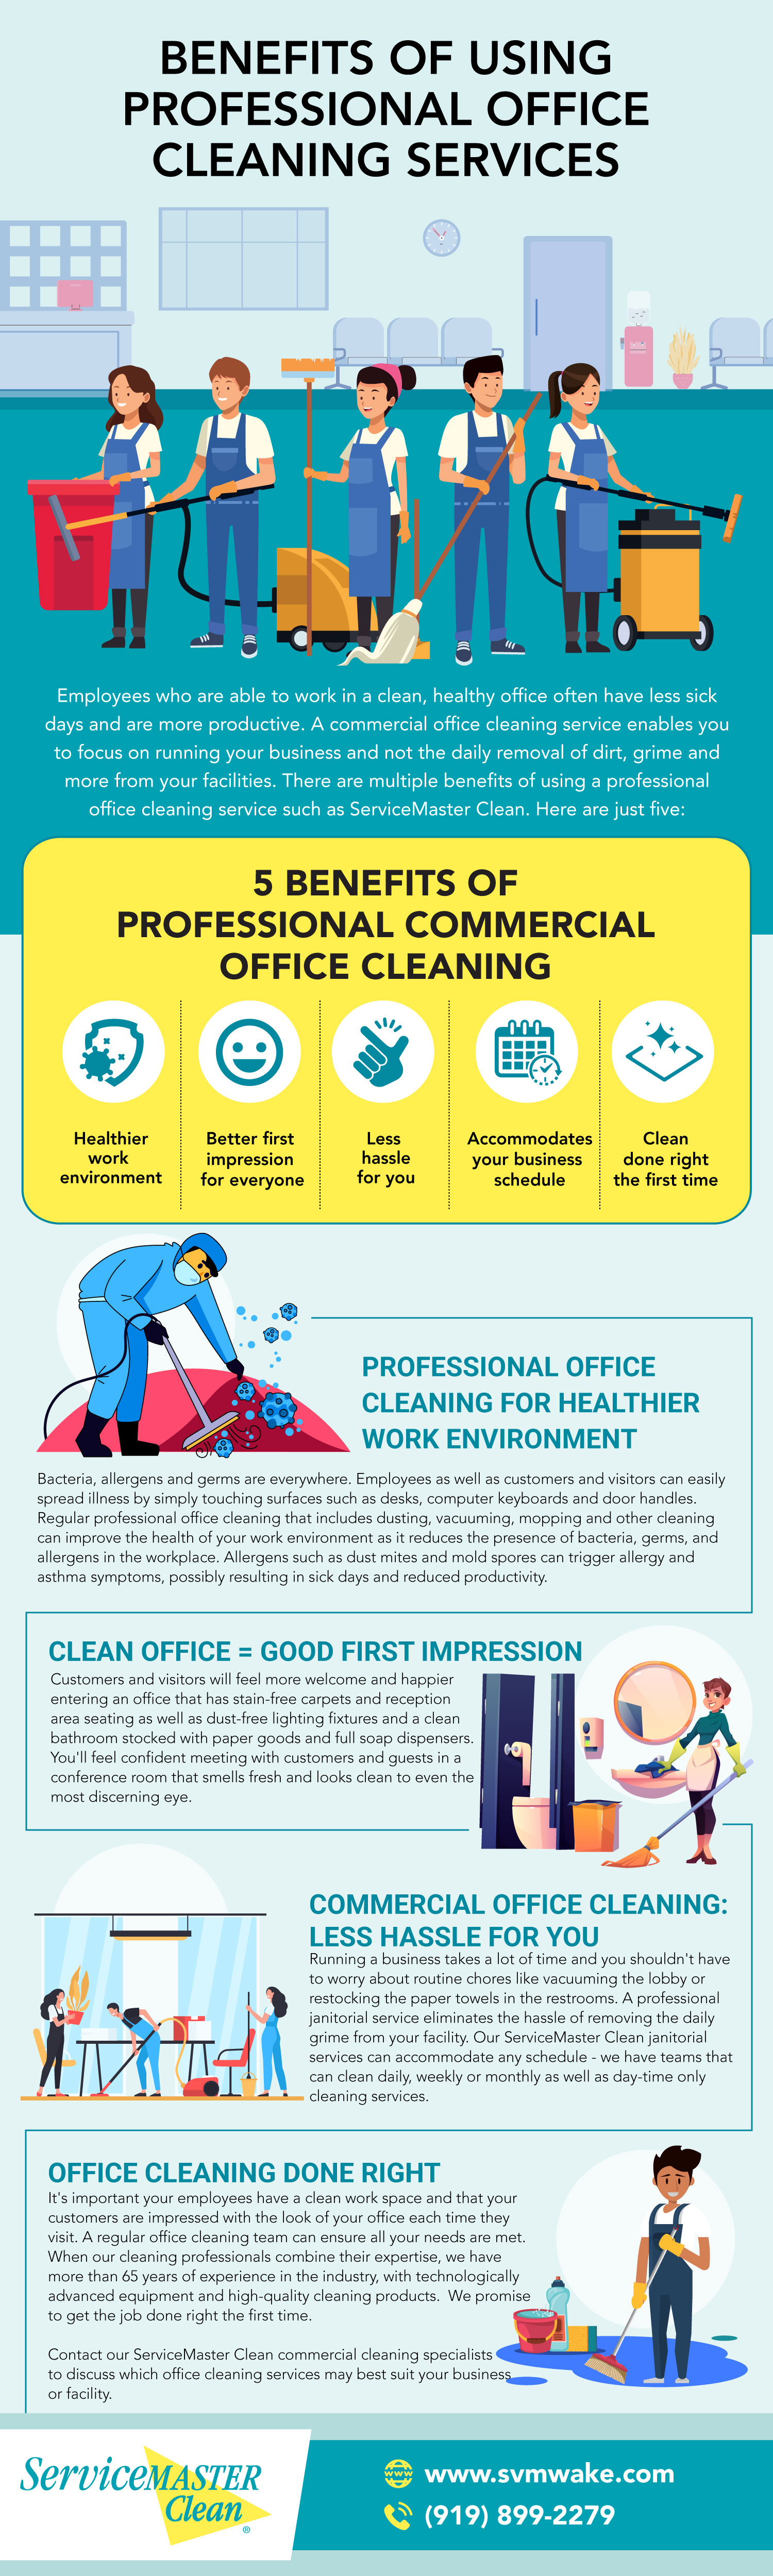 benefits of professional office cleaning infographic